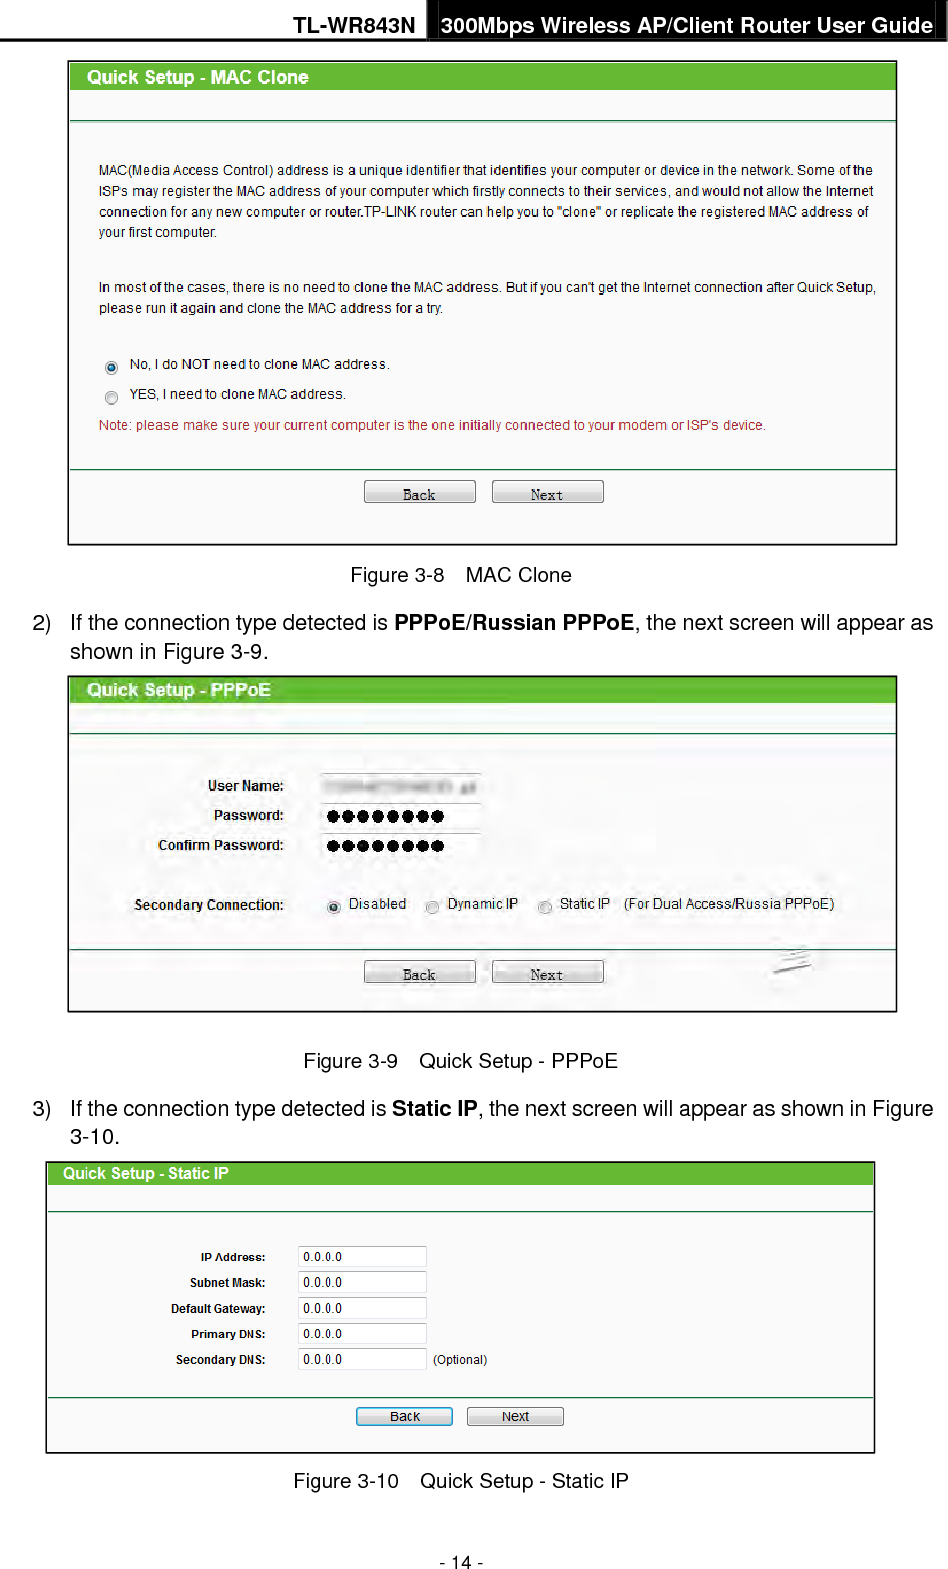 TL-WR843N 300Mbps Wireless AP/Client Router User Guide - 14 - Figure 3-8    MAC Clone 2) If the connection type detected is PPPoE/Russian PPPoE, the next screen will appear asshown in Figure 3-9.Figure 3-9    Quick Setup - PPPoE 3) If the connection type detected is Static IP, the next screen will appear as shown in Figure3-10.Figure 3-10  Quick Setup - Static IP 